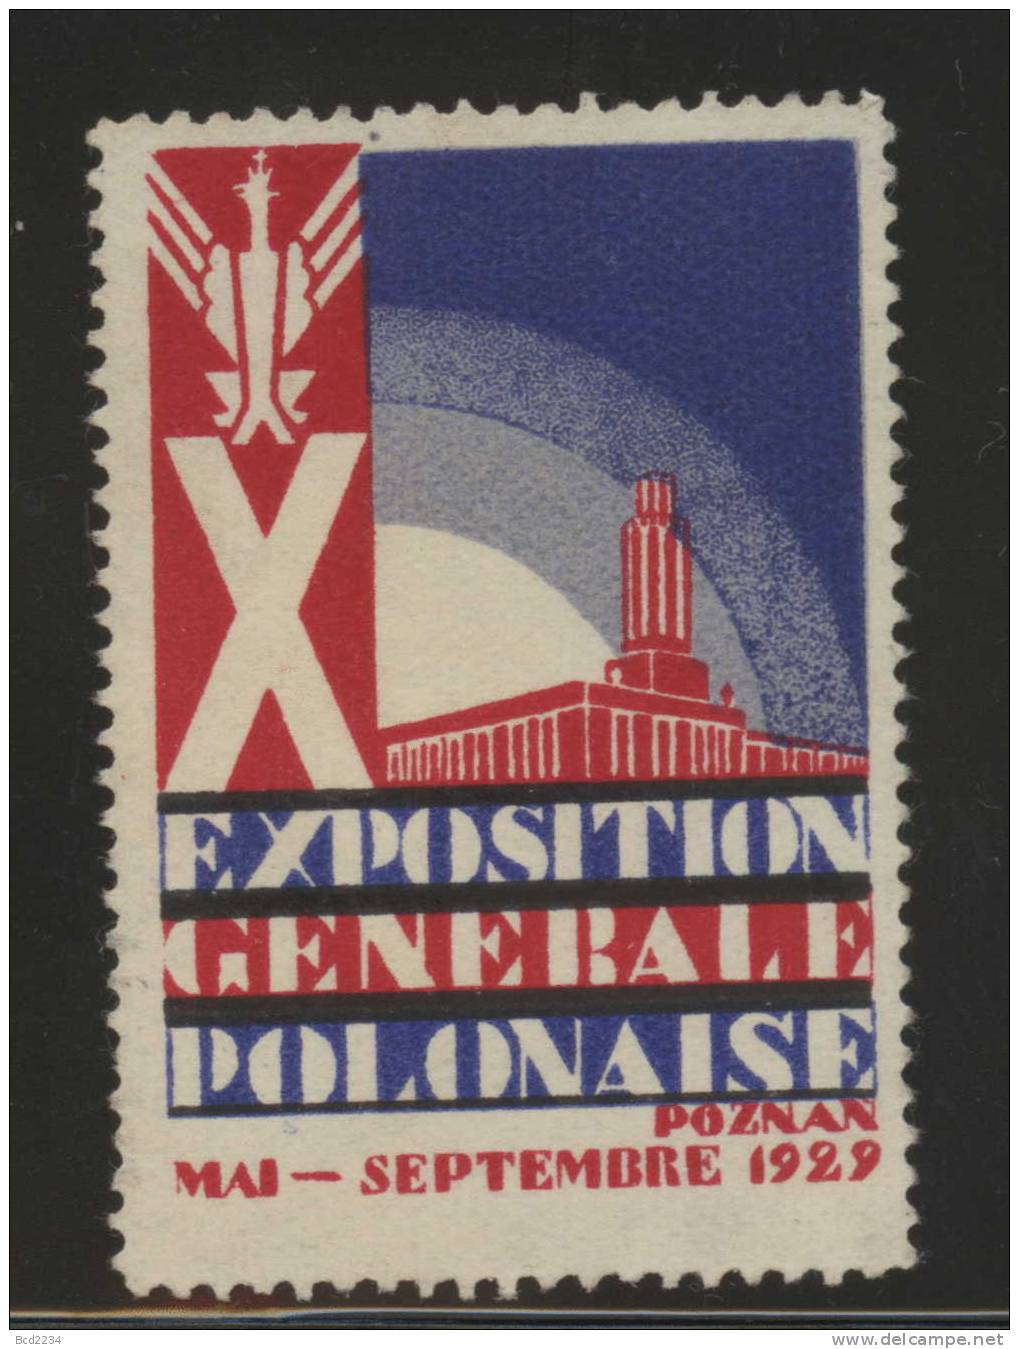 POLAND 1929 POZNAN EXHIBITION TRADE FAIR POSTER STAMP TYPE 5 FRENCH WRITING NO GUM - Fiscales